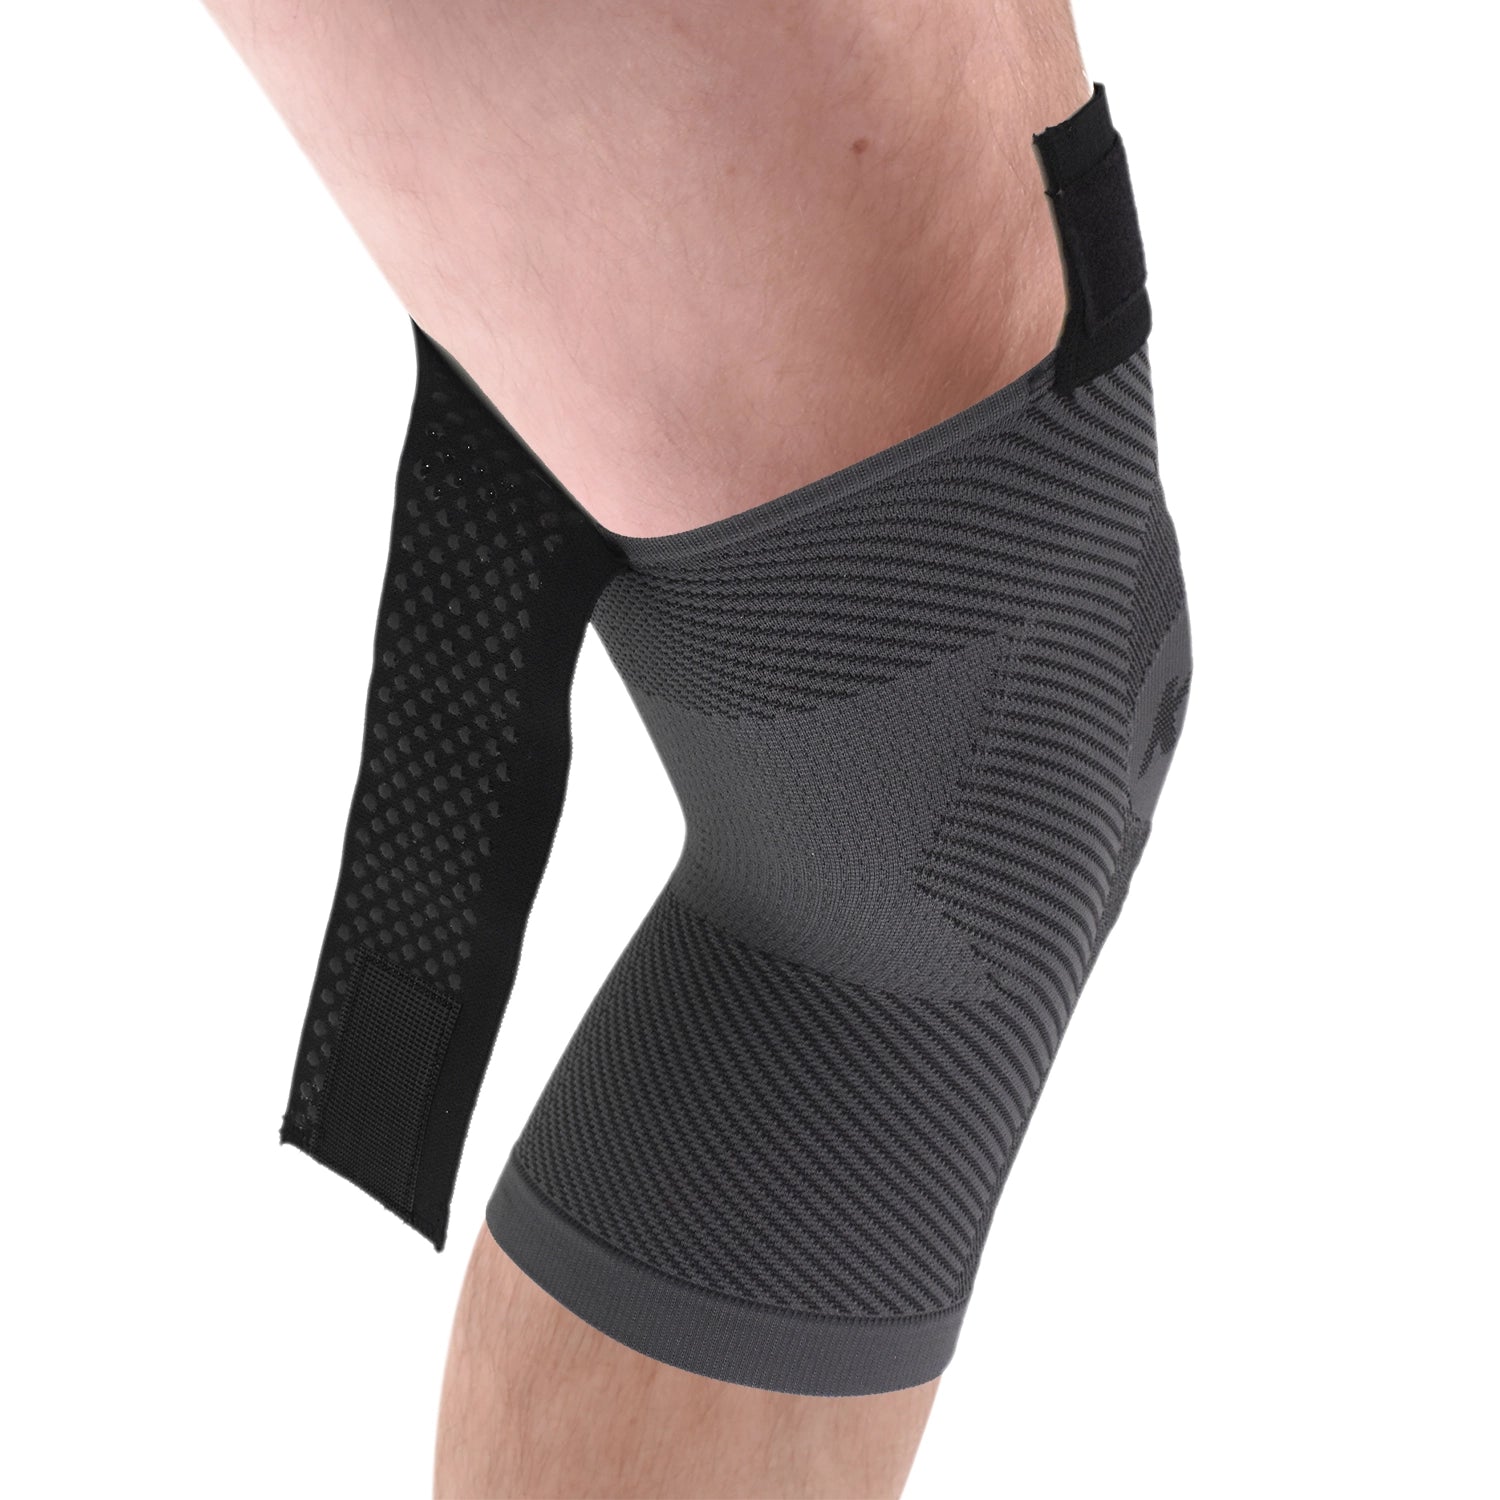 OrthoSleeve KS7 Compression Knee Sleeve for knee pain relief aching knees  and arthritis relief (XX-Large Natural)